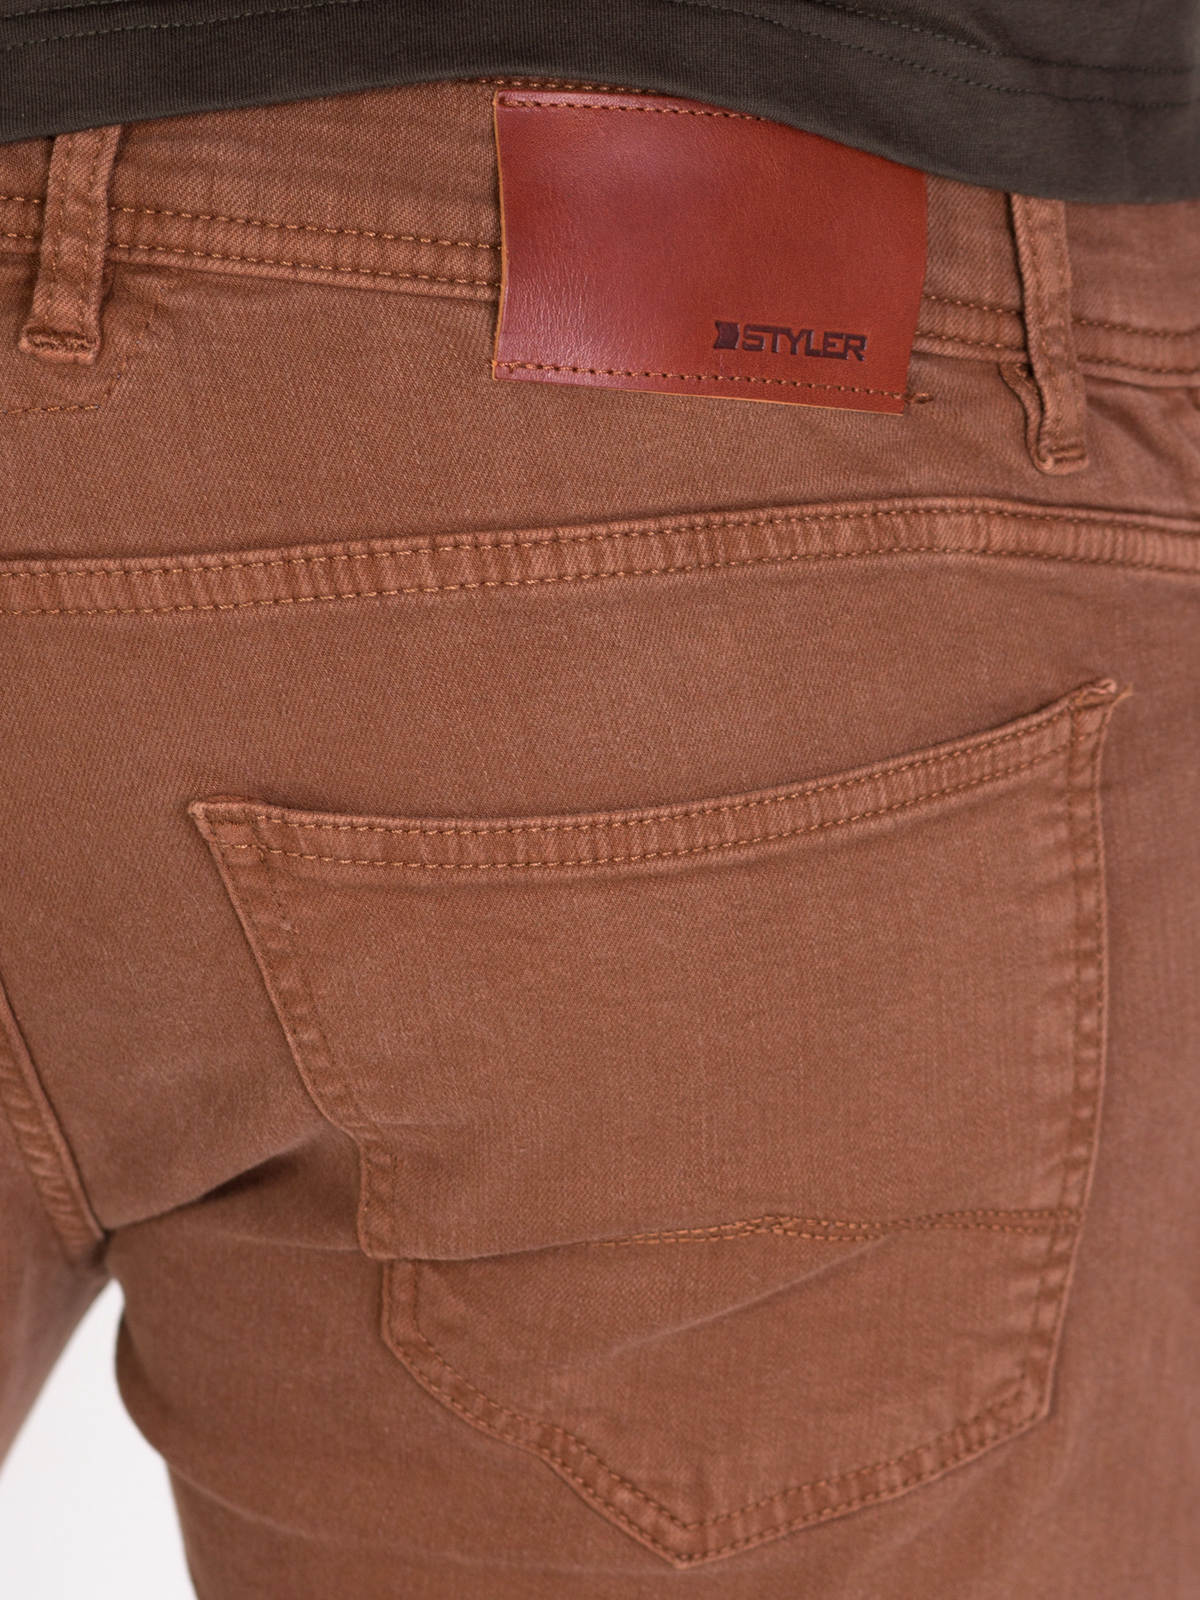 Sports jeans in camel color - 62154 € 44.43 img3